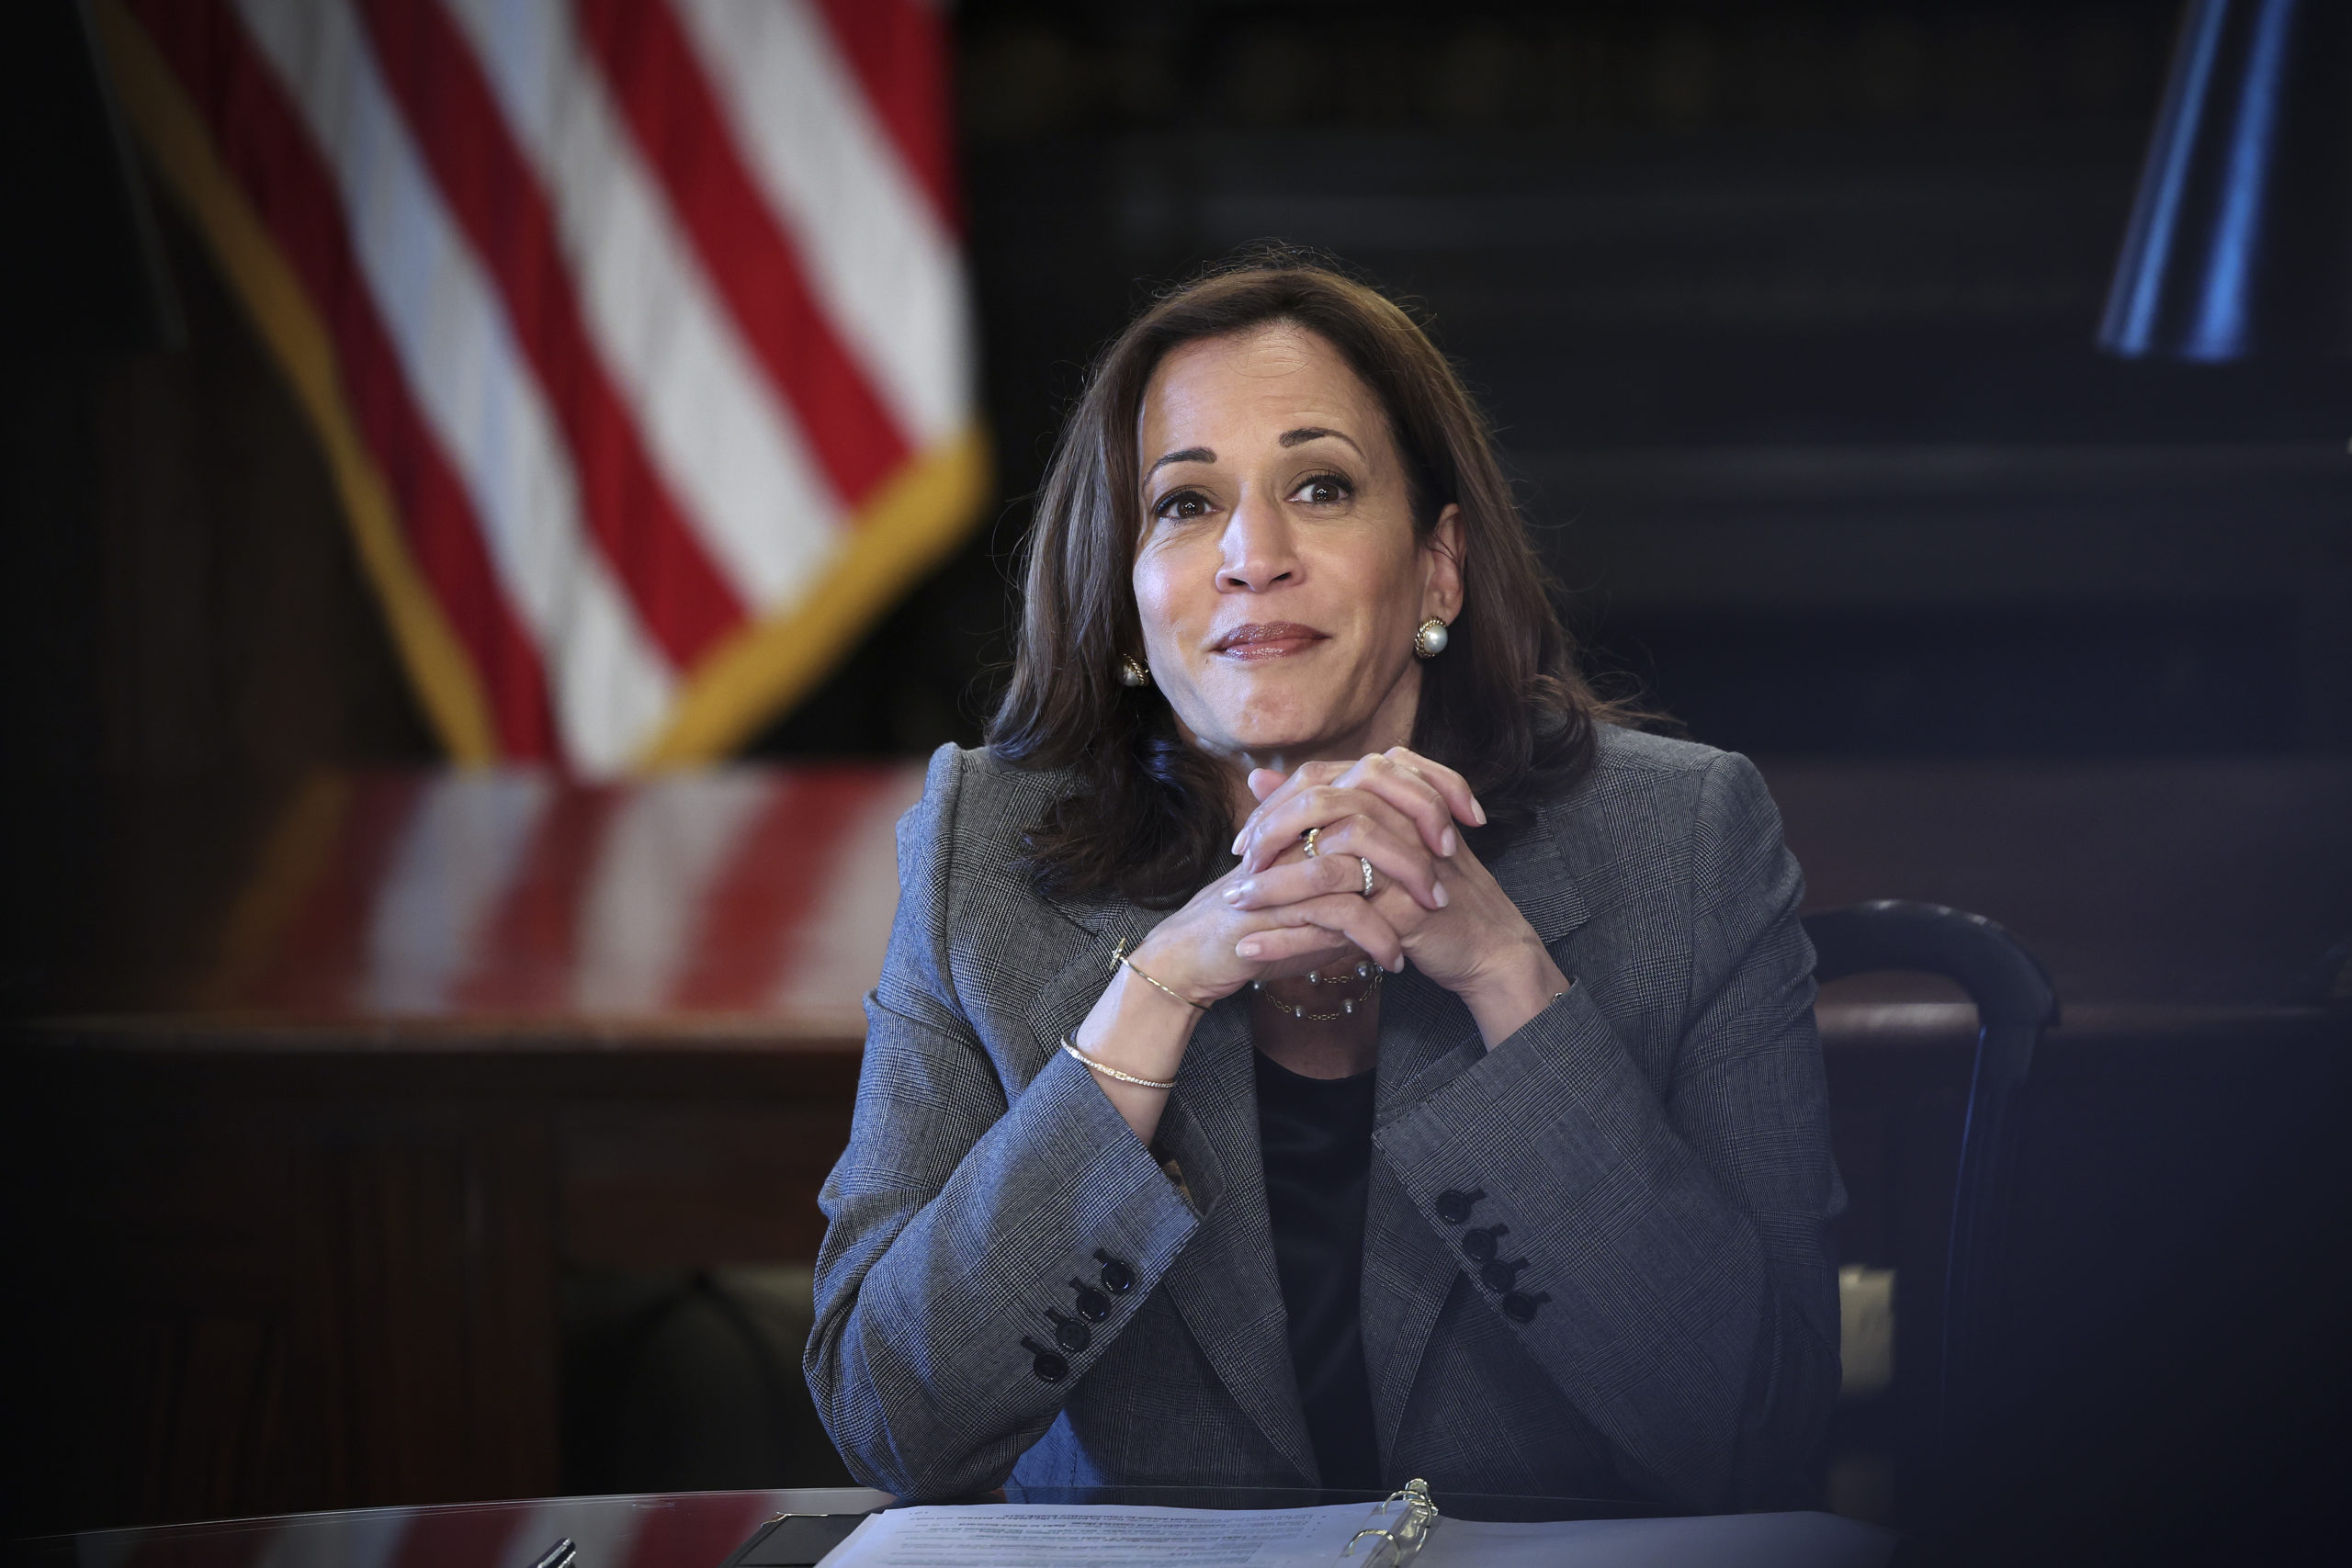 U.S. Vice President Kamala Harris delivers remarks during a meeting with legal experts on the pending Supreme Court decision impacting the Roe vs. Wade case at the White House complex on June 14, 2022 in Washington, DC. (Photo by Win McNamee/Getty Images)